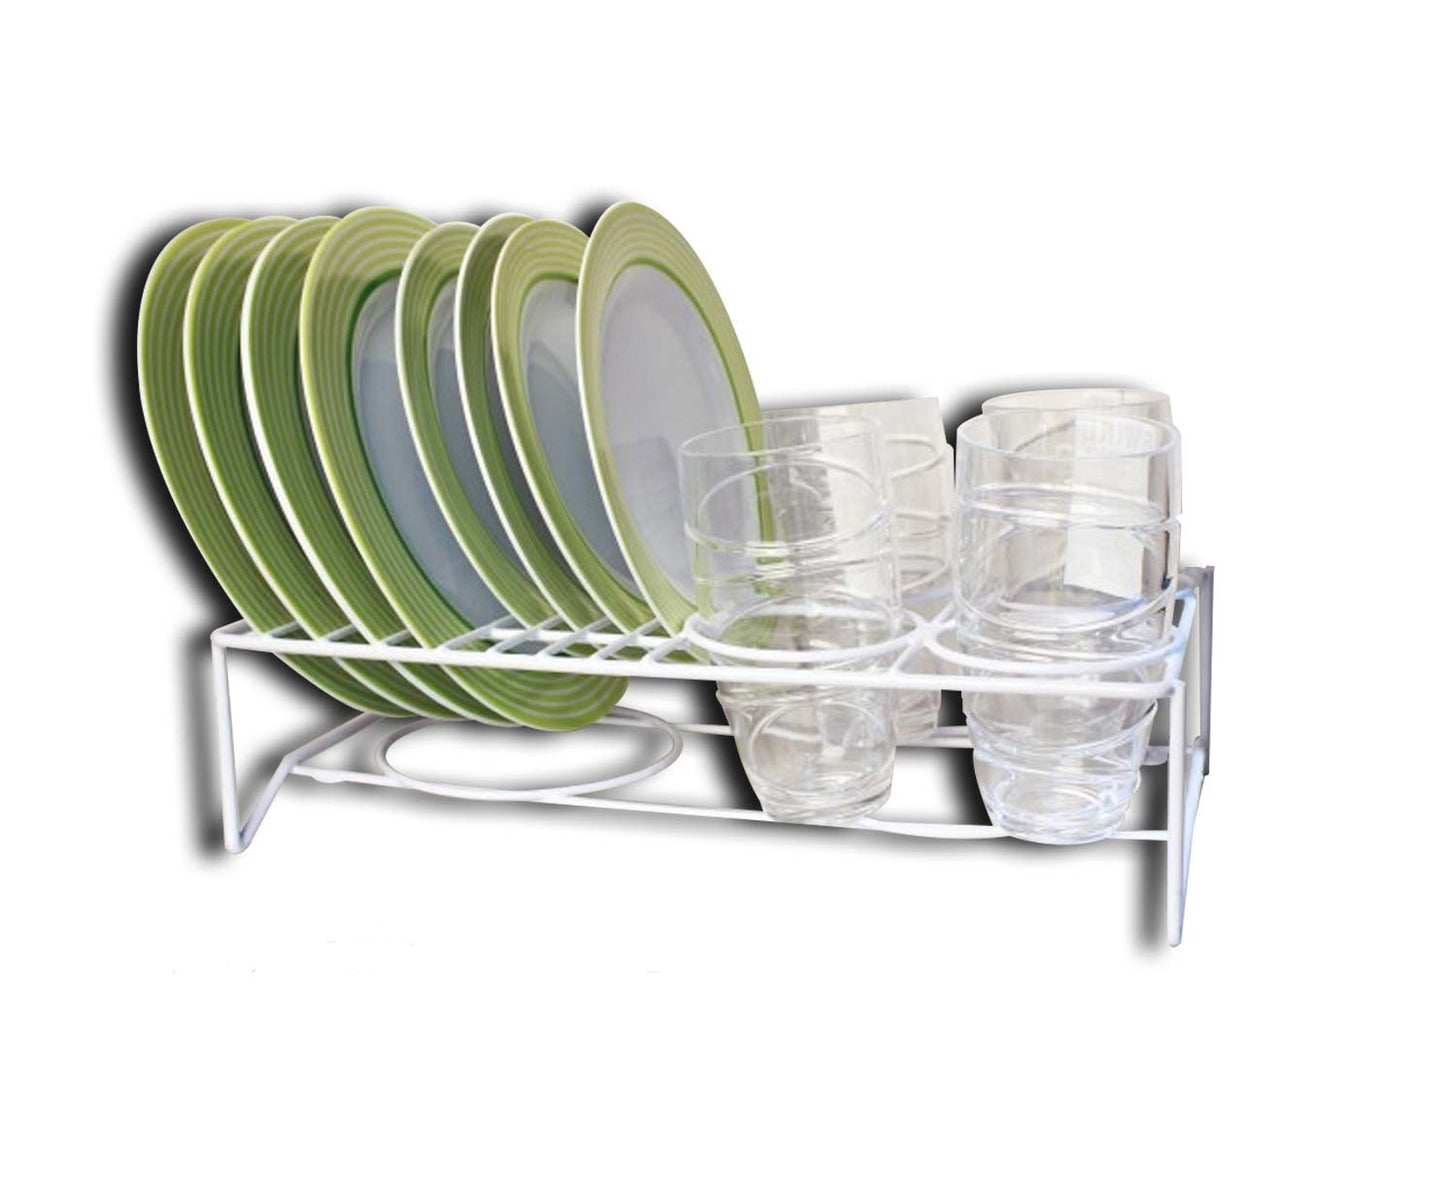 Camec Cup & Plate Holder